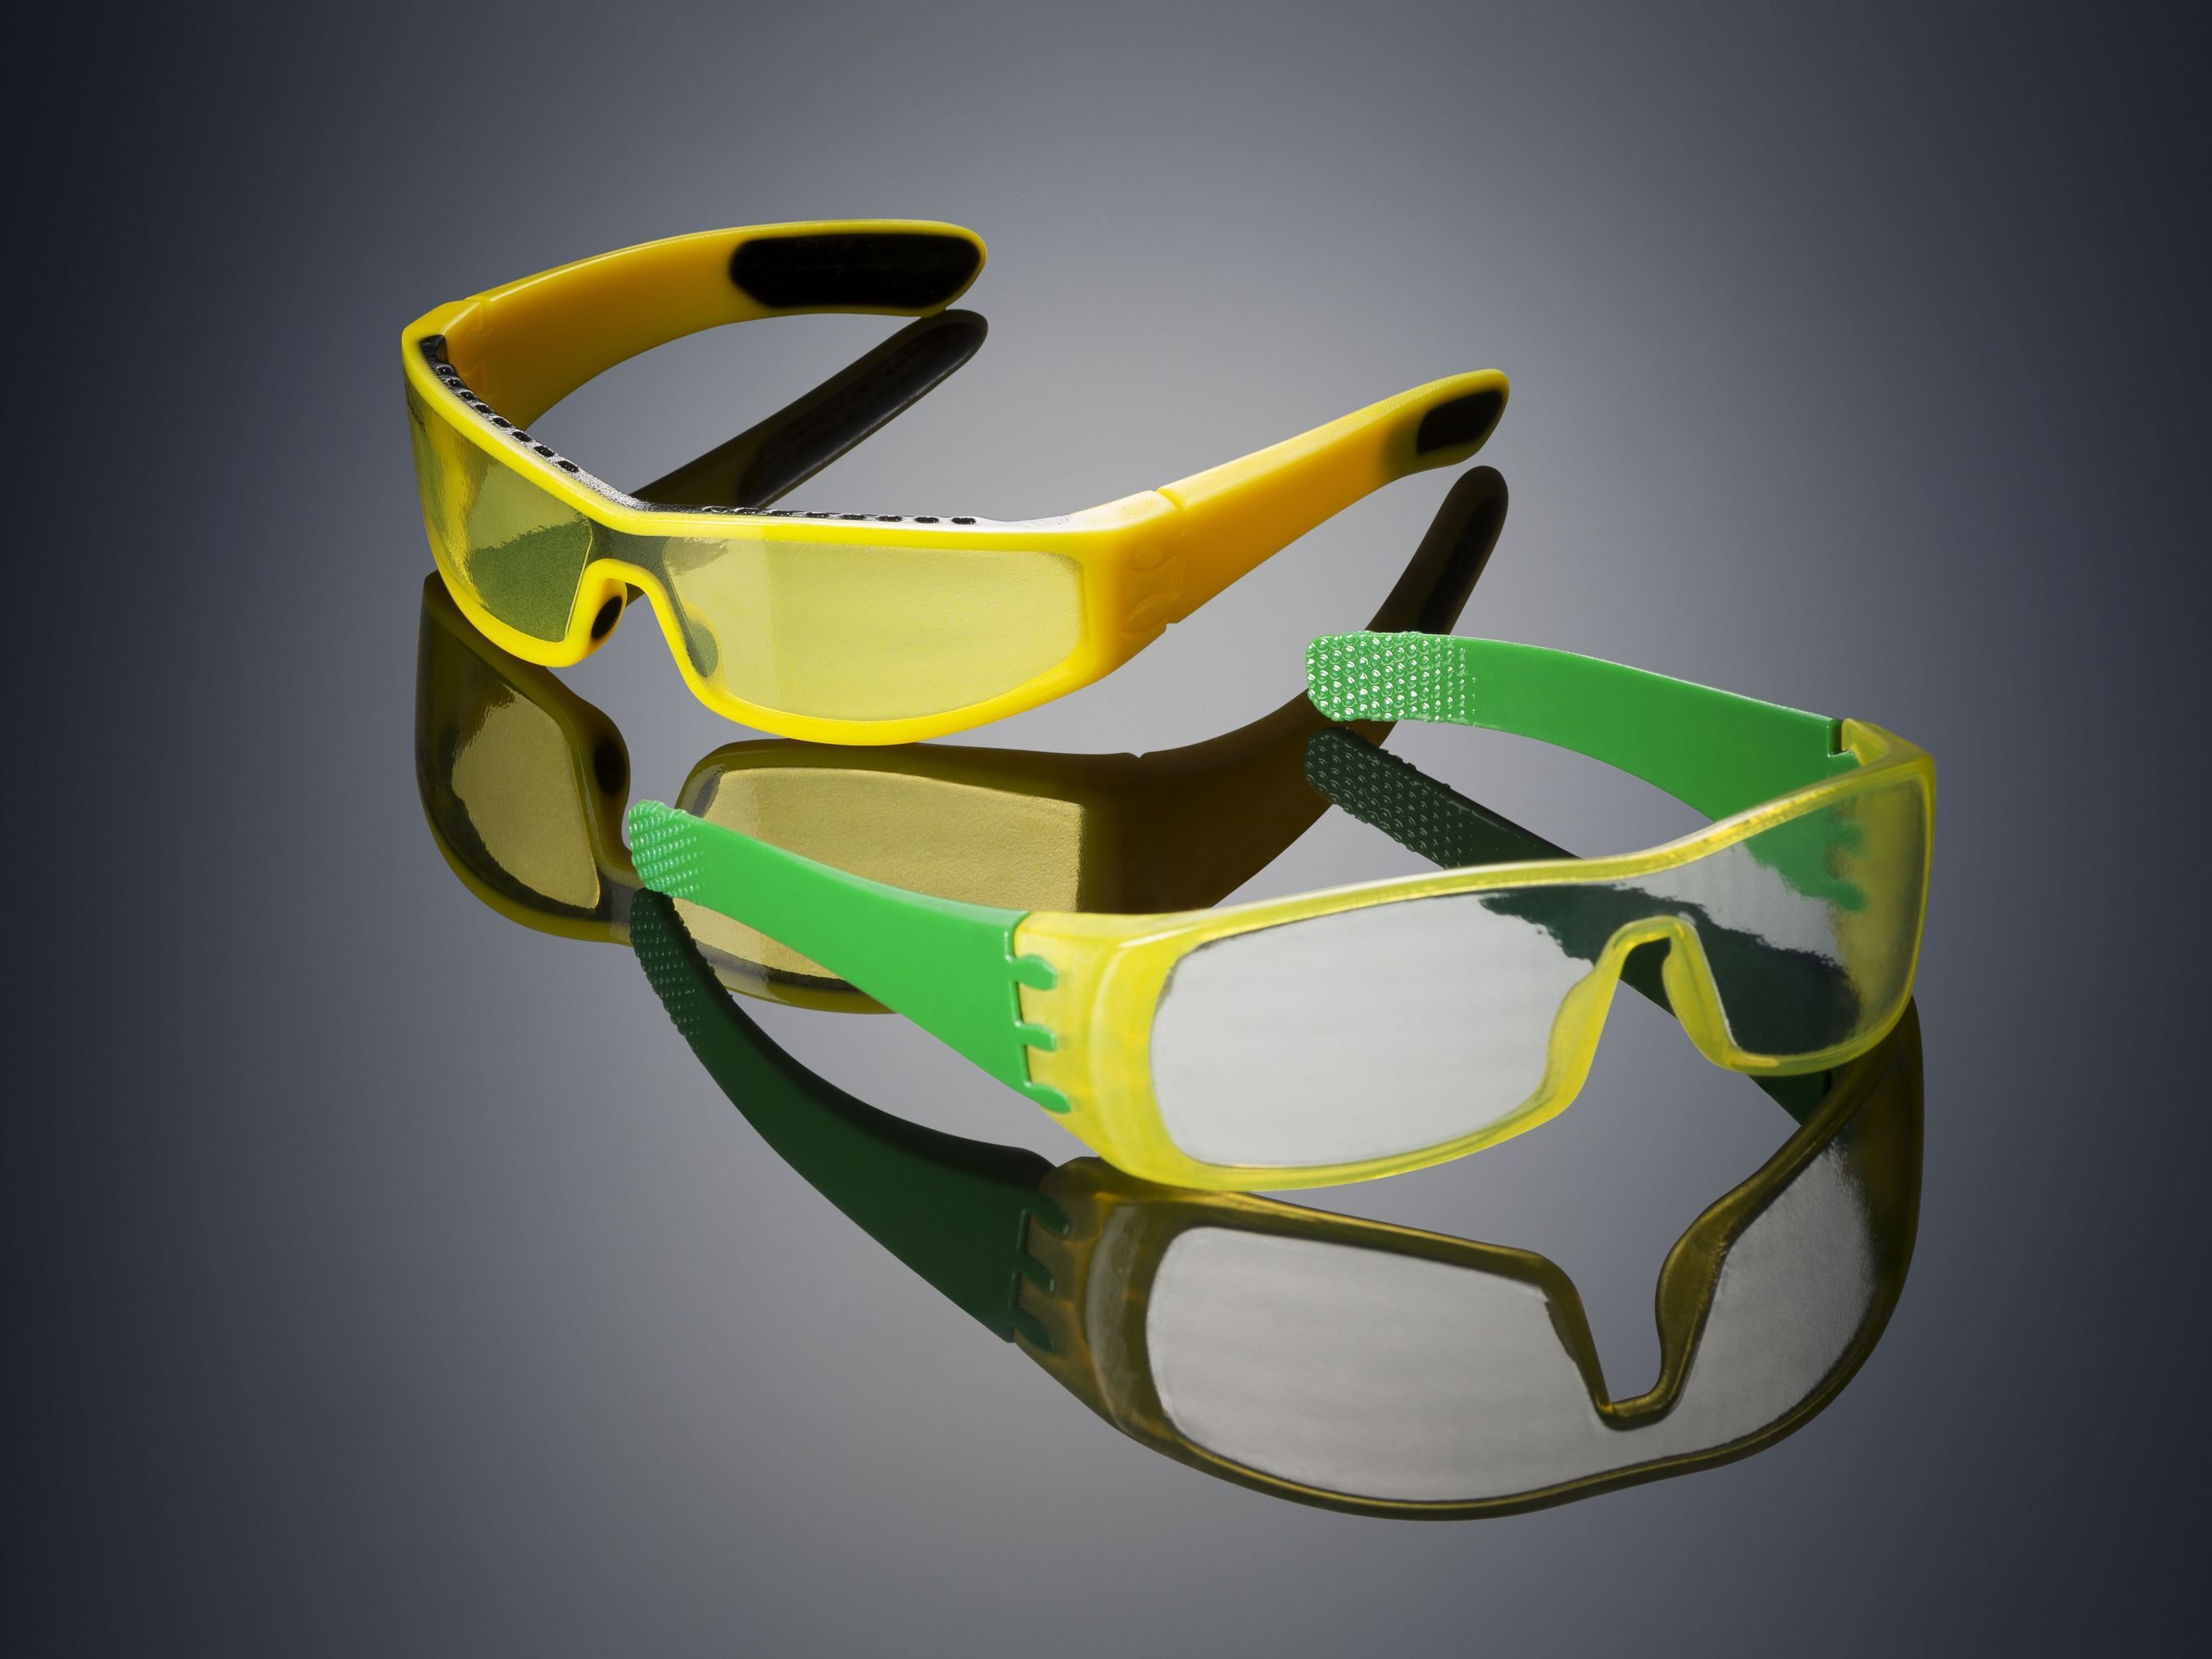 Glasses 3D printed on the Objet500 Connex3 Color Multi-material 3D Printer using Opaque VeroYellow (the frame), rubber-like black (TangoBlackPlus â€“ also on the frame), and a unique translucent yellow tint (the lenses) in one print job â€“ no assembly required. (PRNewsFoto/Stratasys)